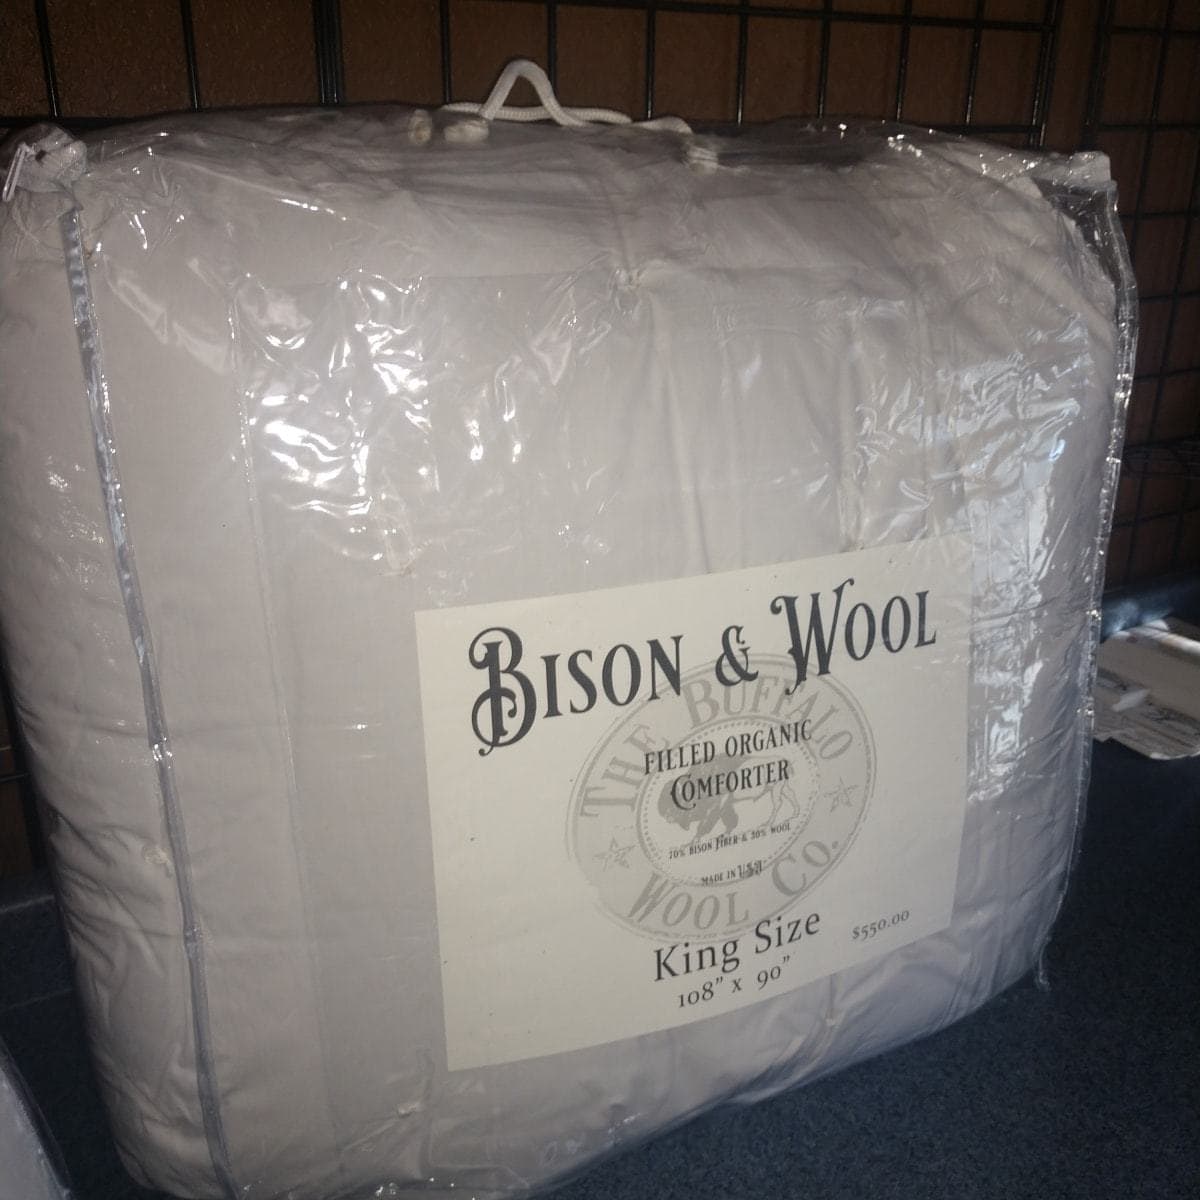 Bison & Wool Comforters Accessories The Buffalo Wool Co. King 108"x90" 